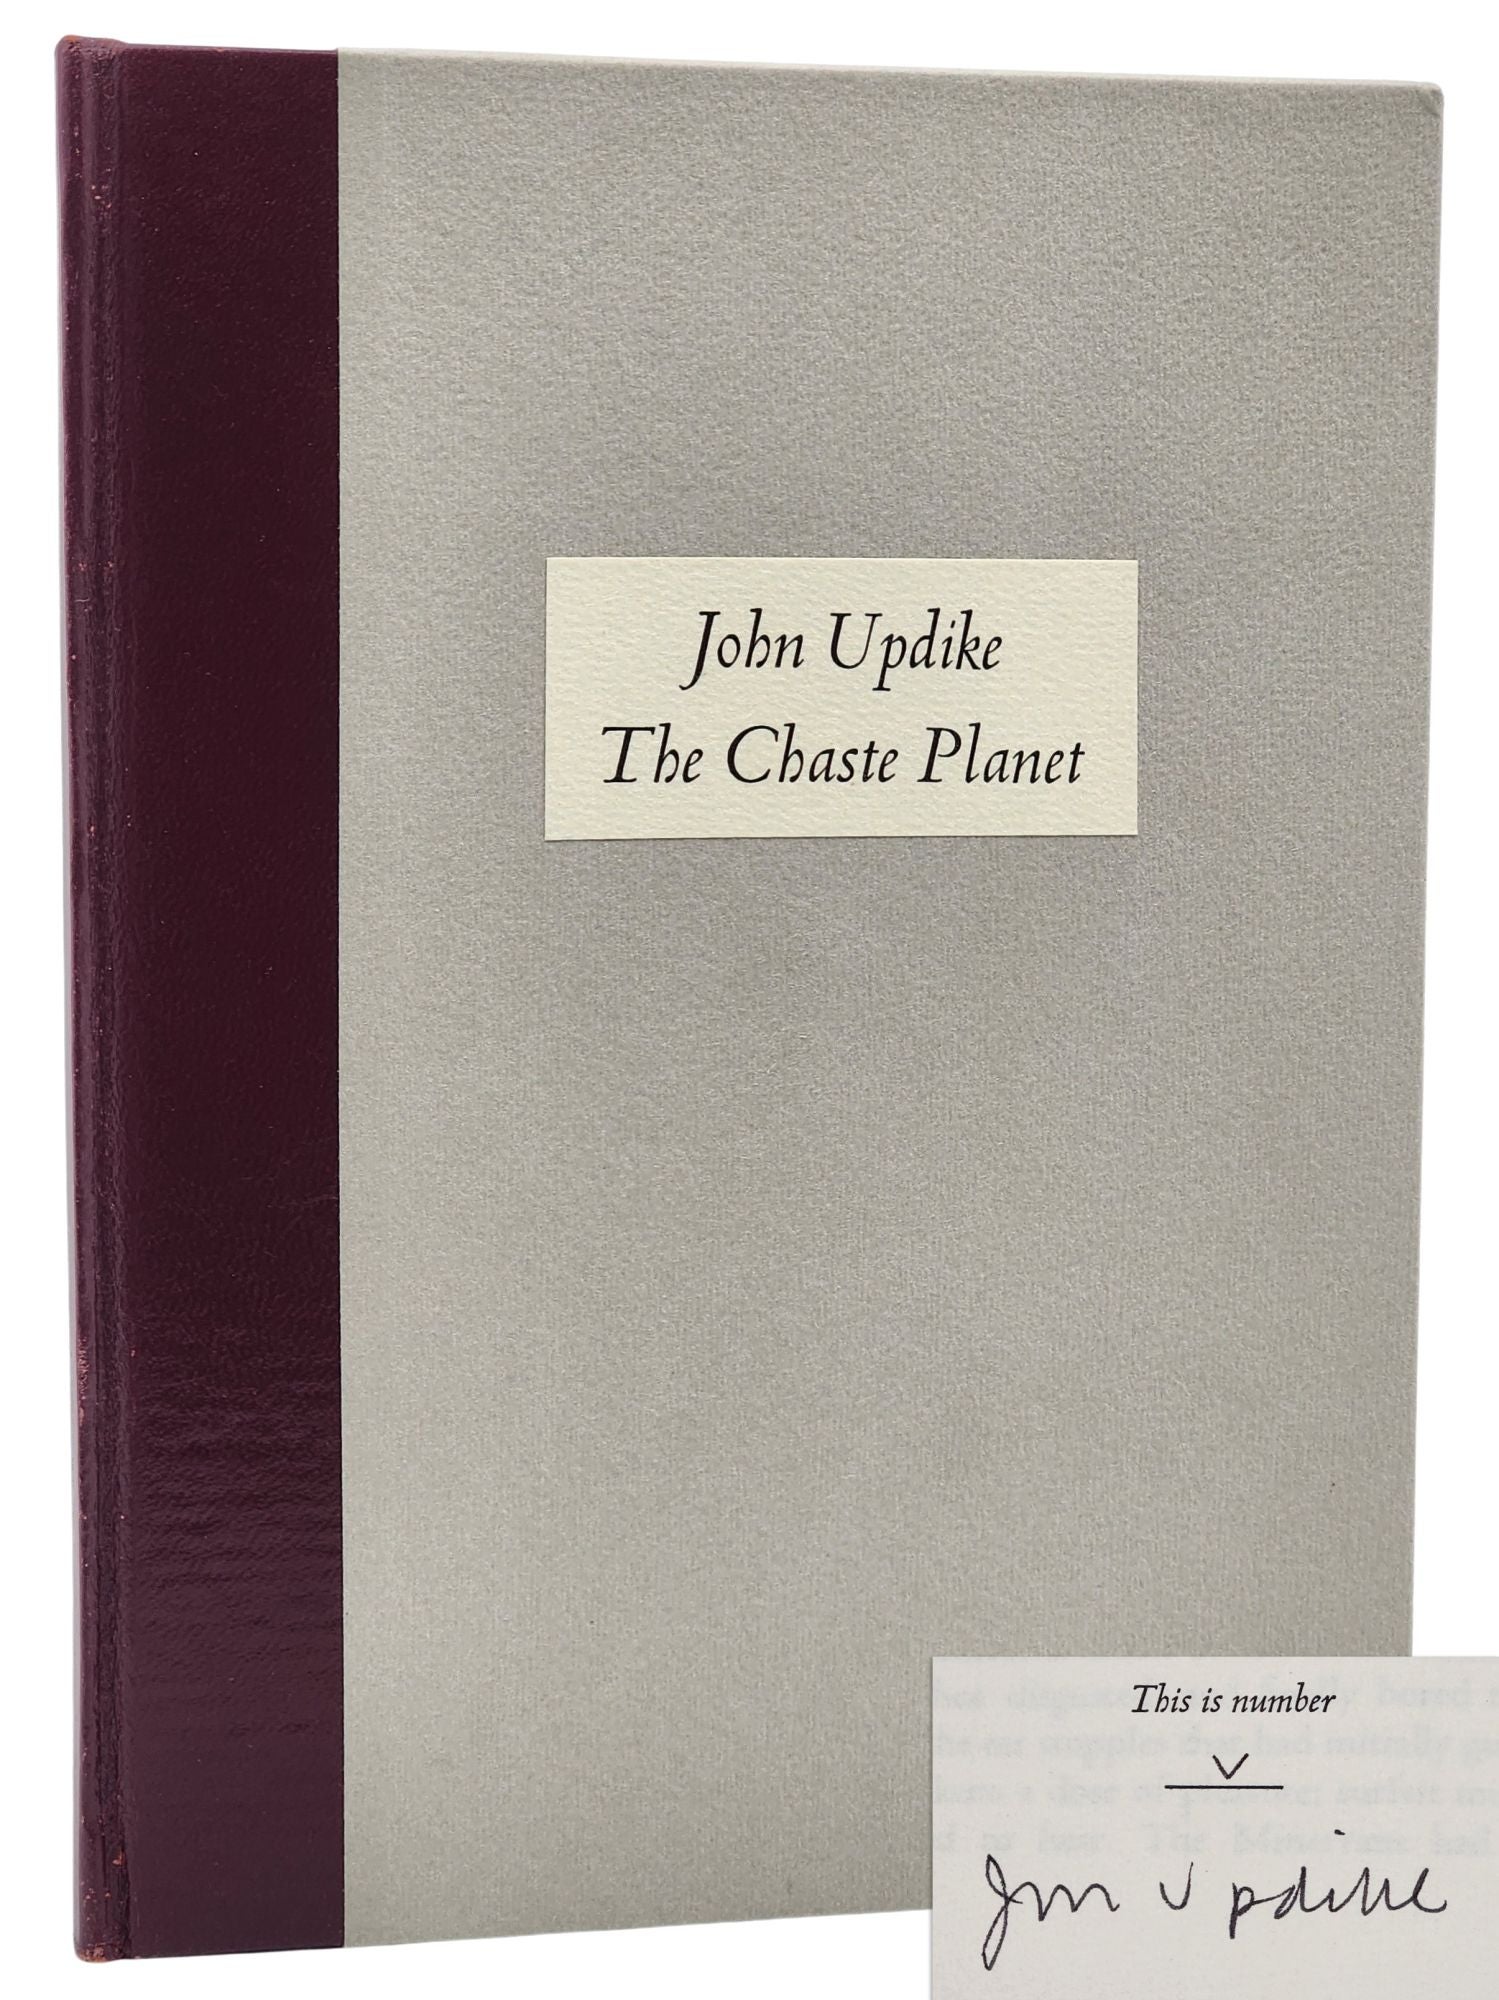 [Book #29429] THE CHASTE PLANET [ONE OF 26 LETTERED SIGNED]. John Updike.